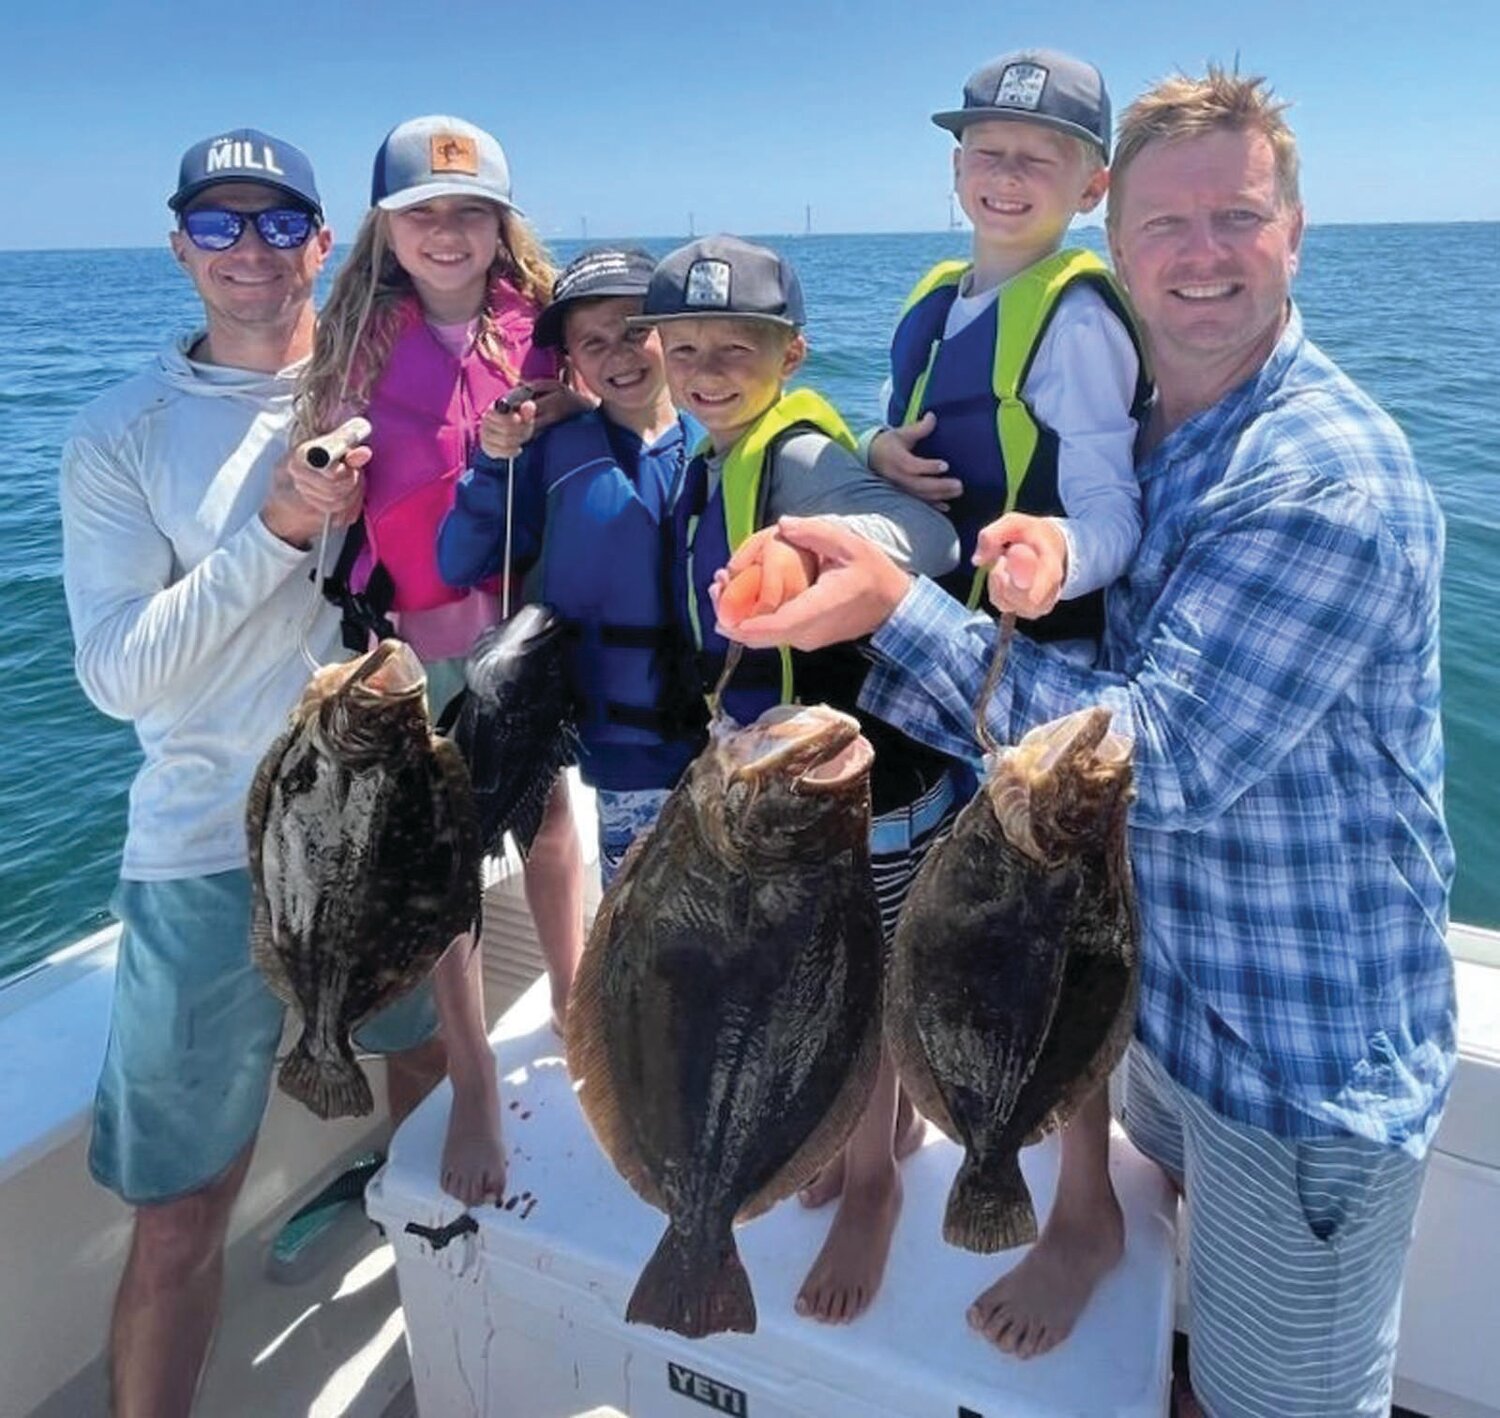 BEST TEAM PHOTO: Best Team Photo in Block Island Tournament was awarded to team ‘Defiant’ for this photo taken in the Block Island Wind Farm with some nice fluke caught by young anglers.